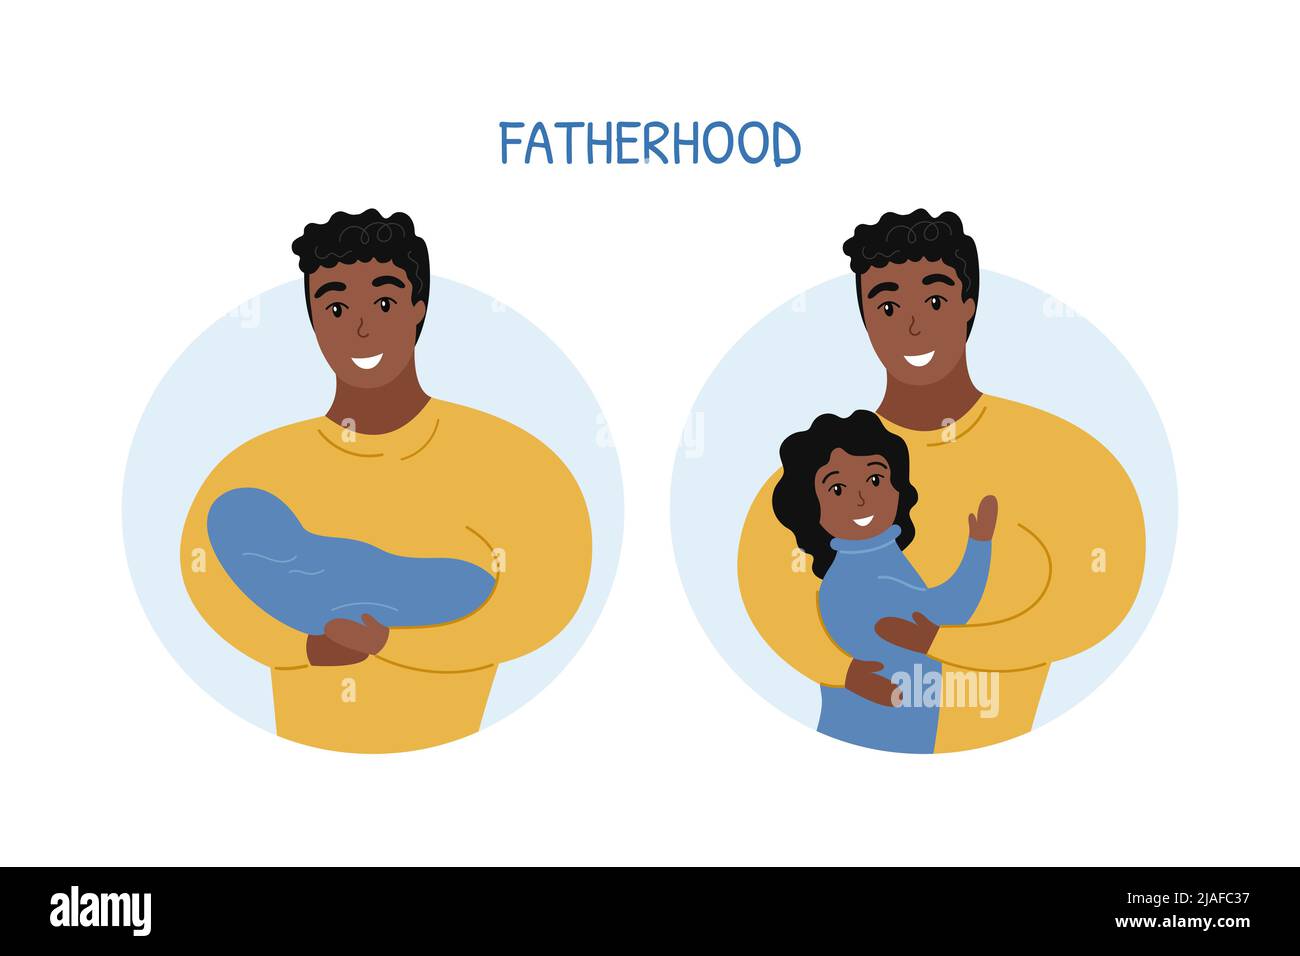 Fatherhood flat vector illustration. Dad holding newborn baby. African american man and child hugging. Father and daughter together. Stock Vector